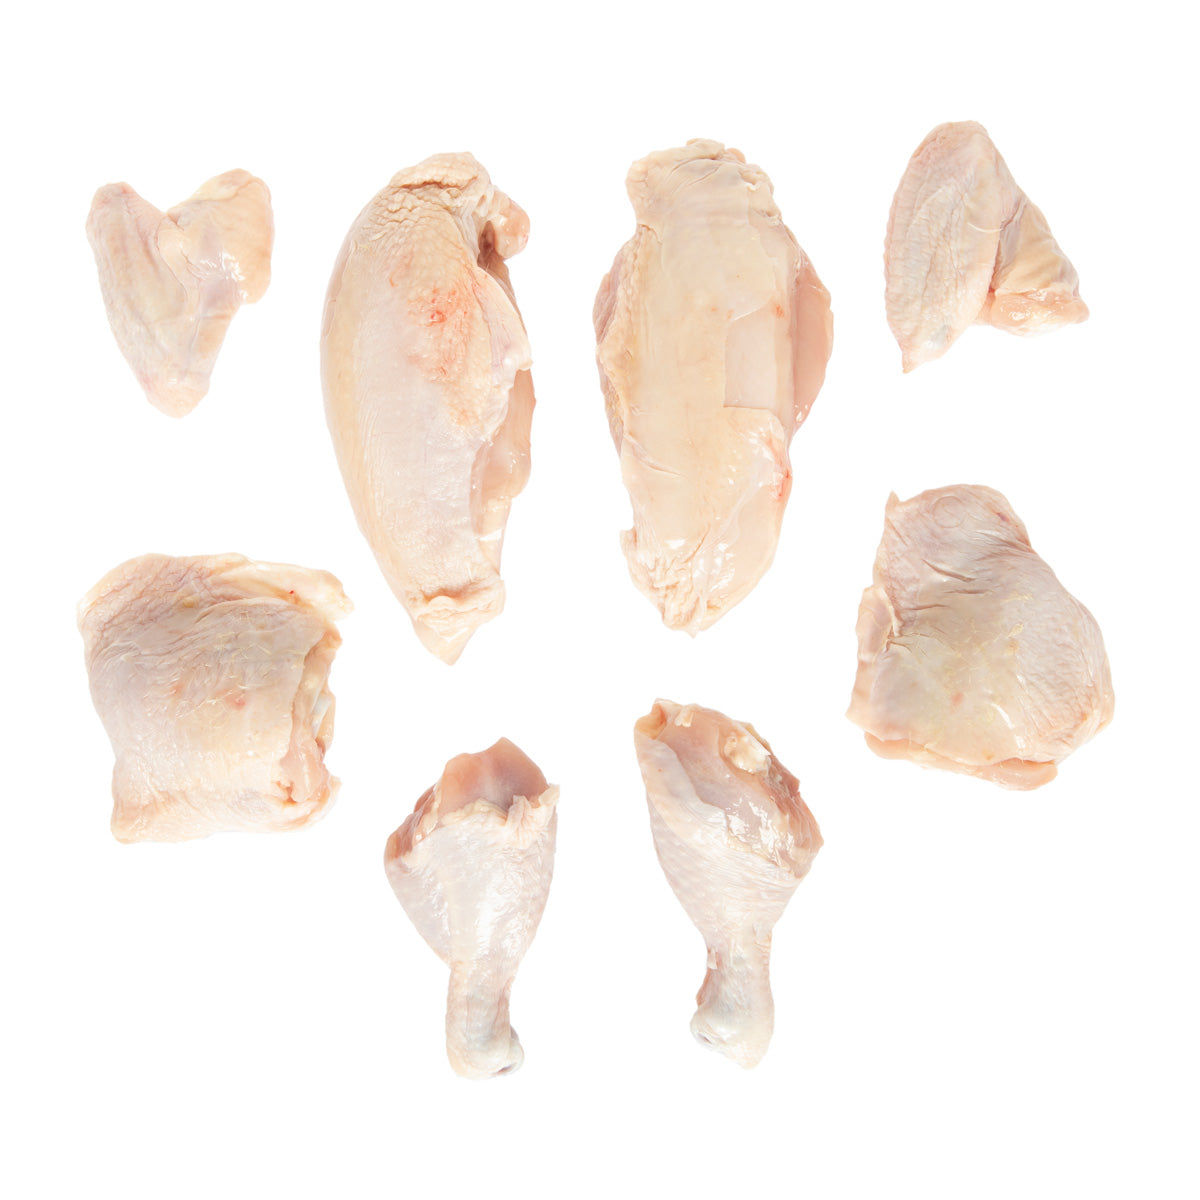 La Belle Farm Air-Chilled Whole Chicken No Giblets 8 Way